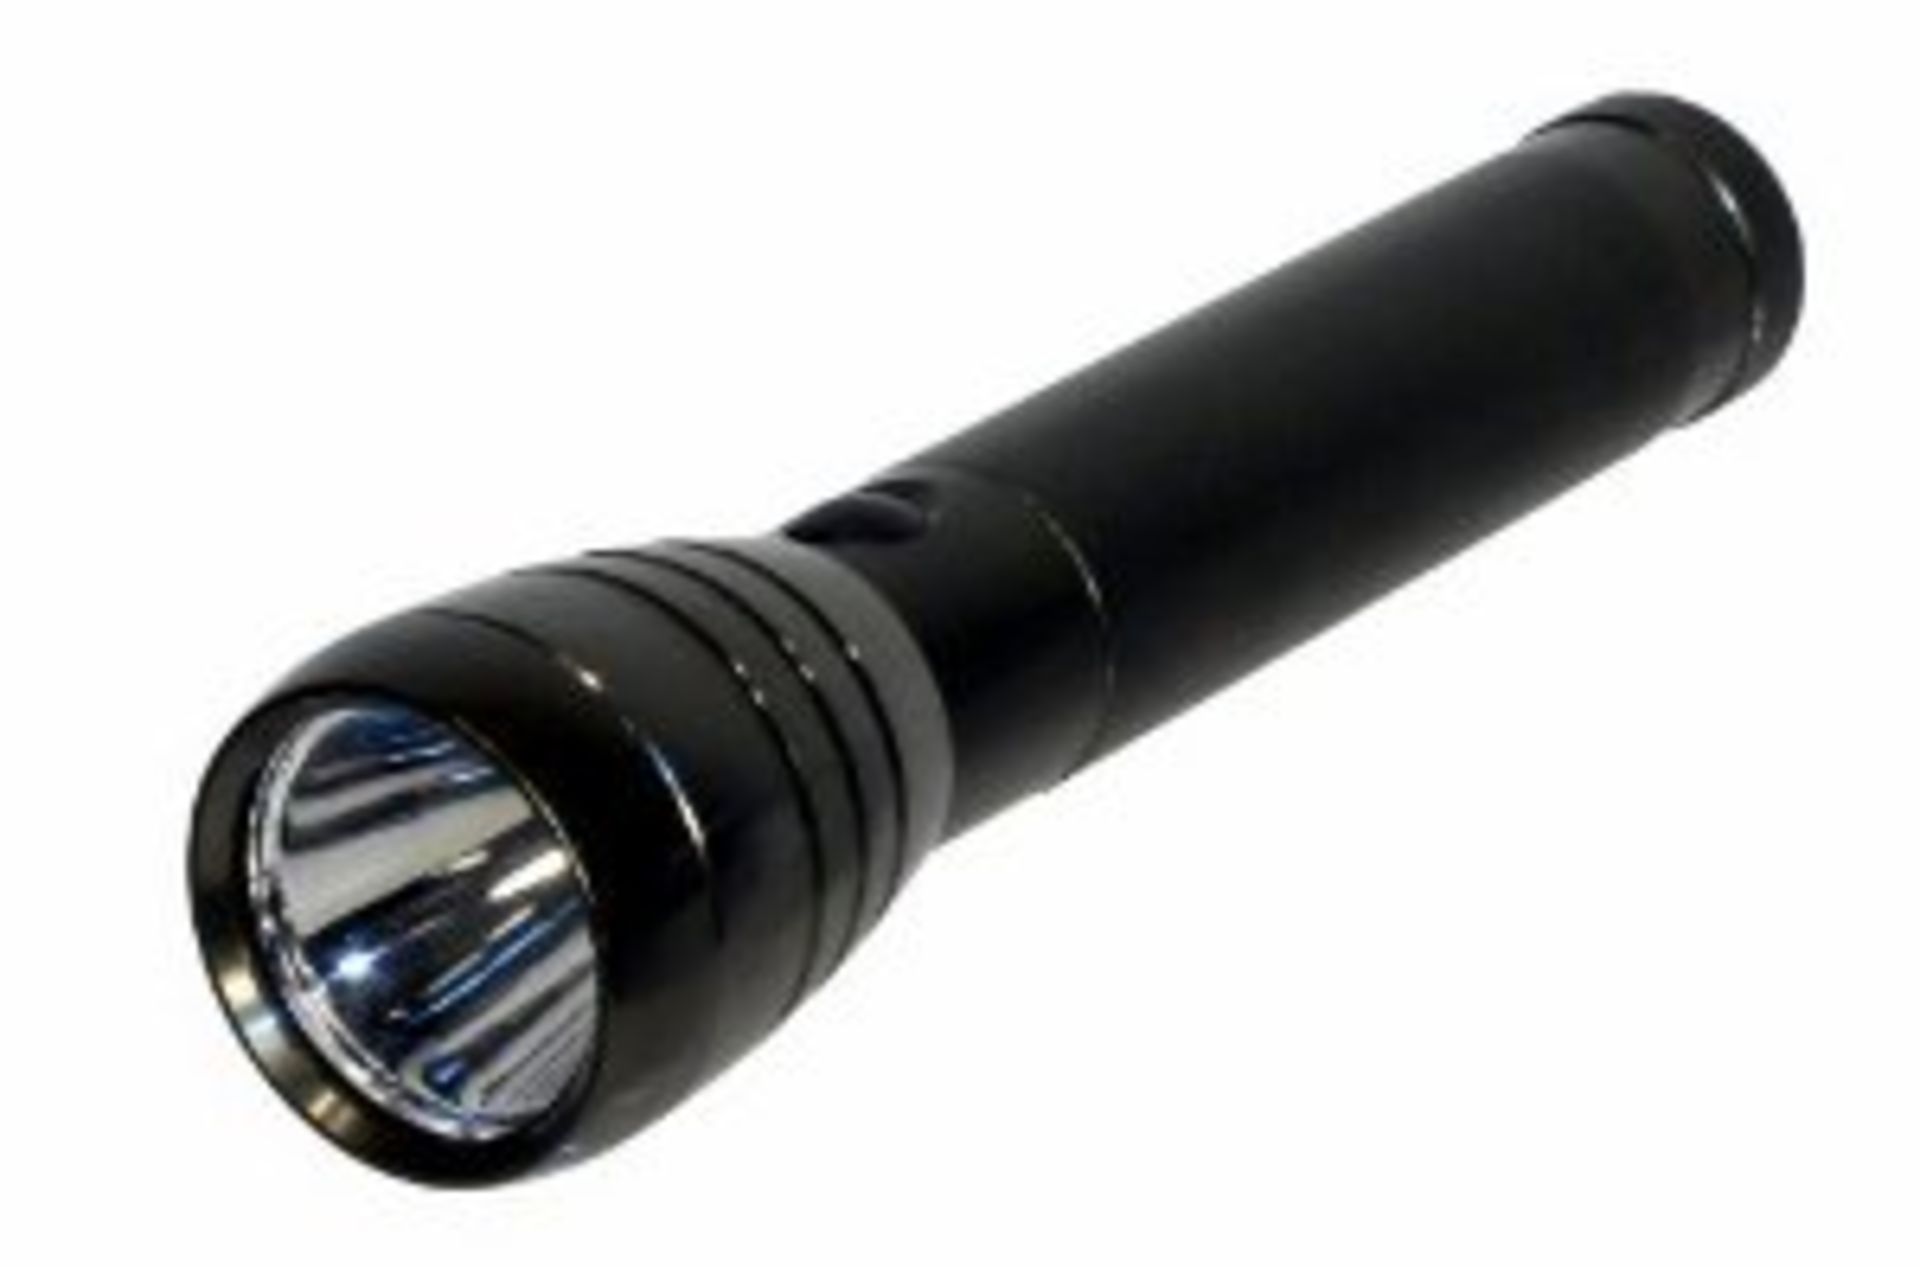 V *TRADE QTY* Brand New Metal Case Pro Torch RRP £16.99 (2D Cells) X 4 YOUR BID PRICE TO BE